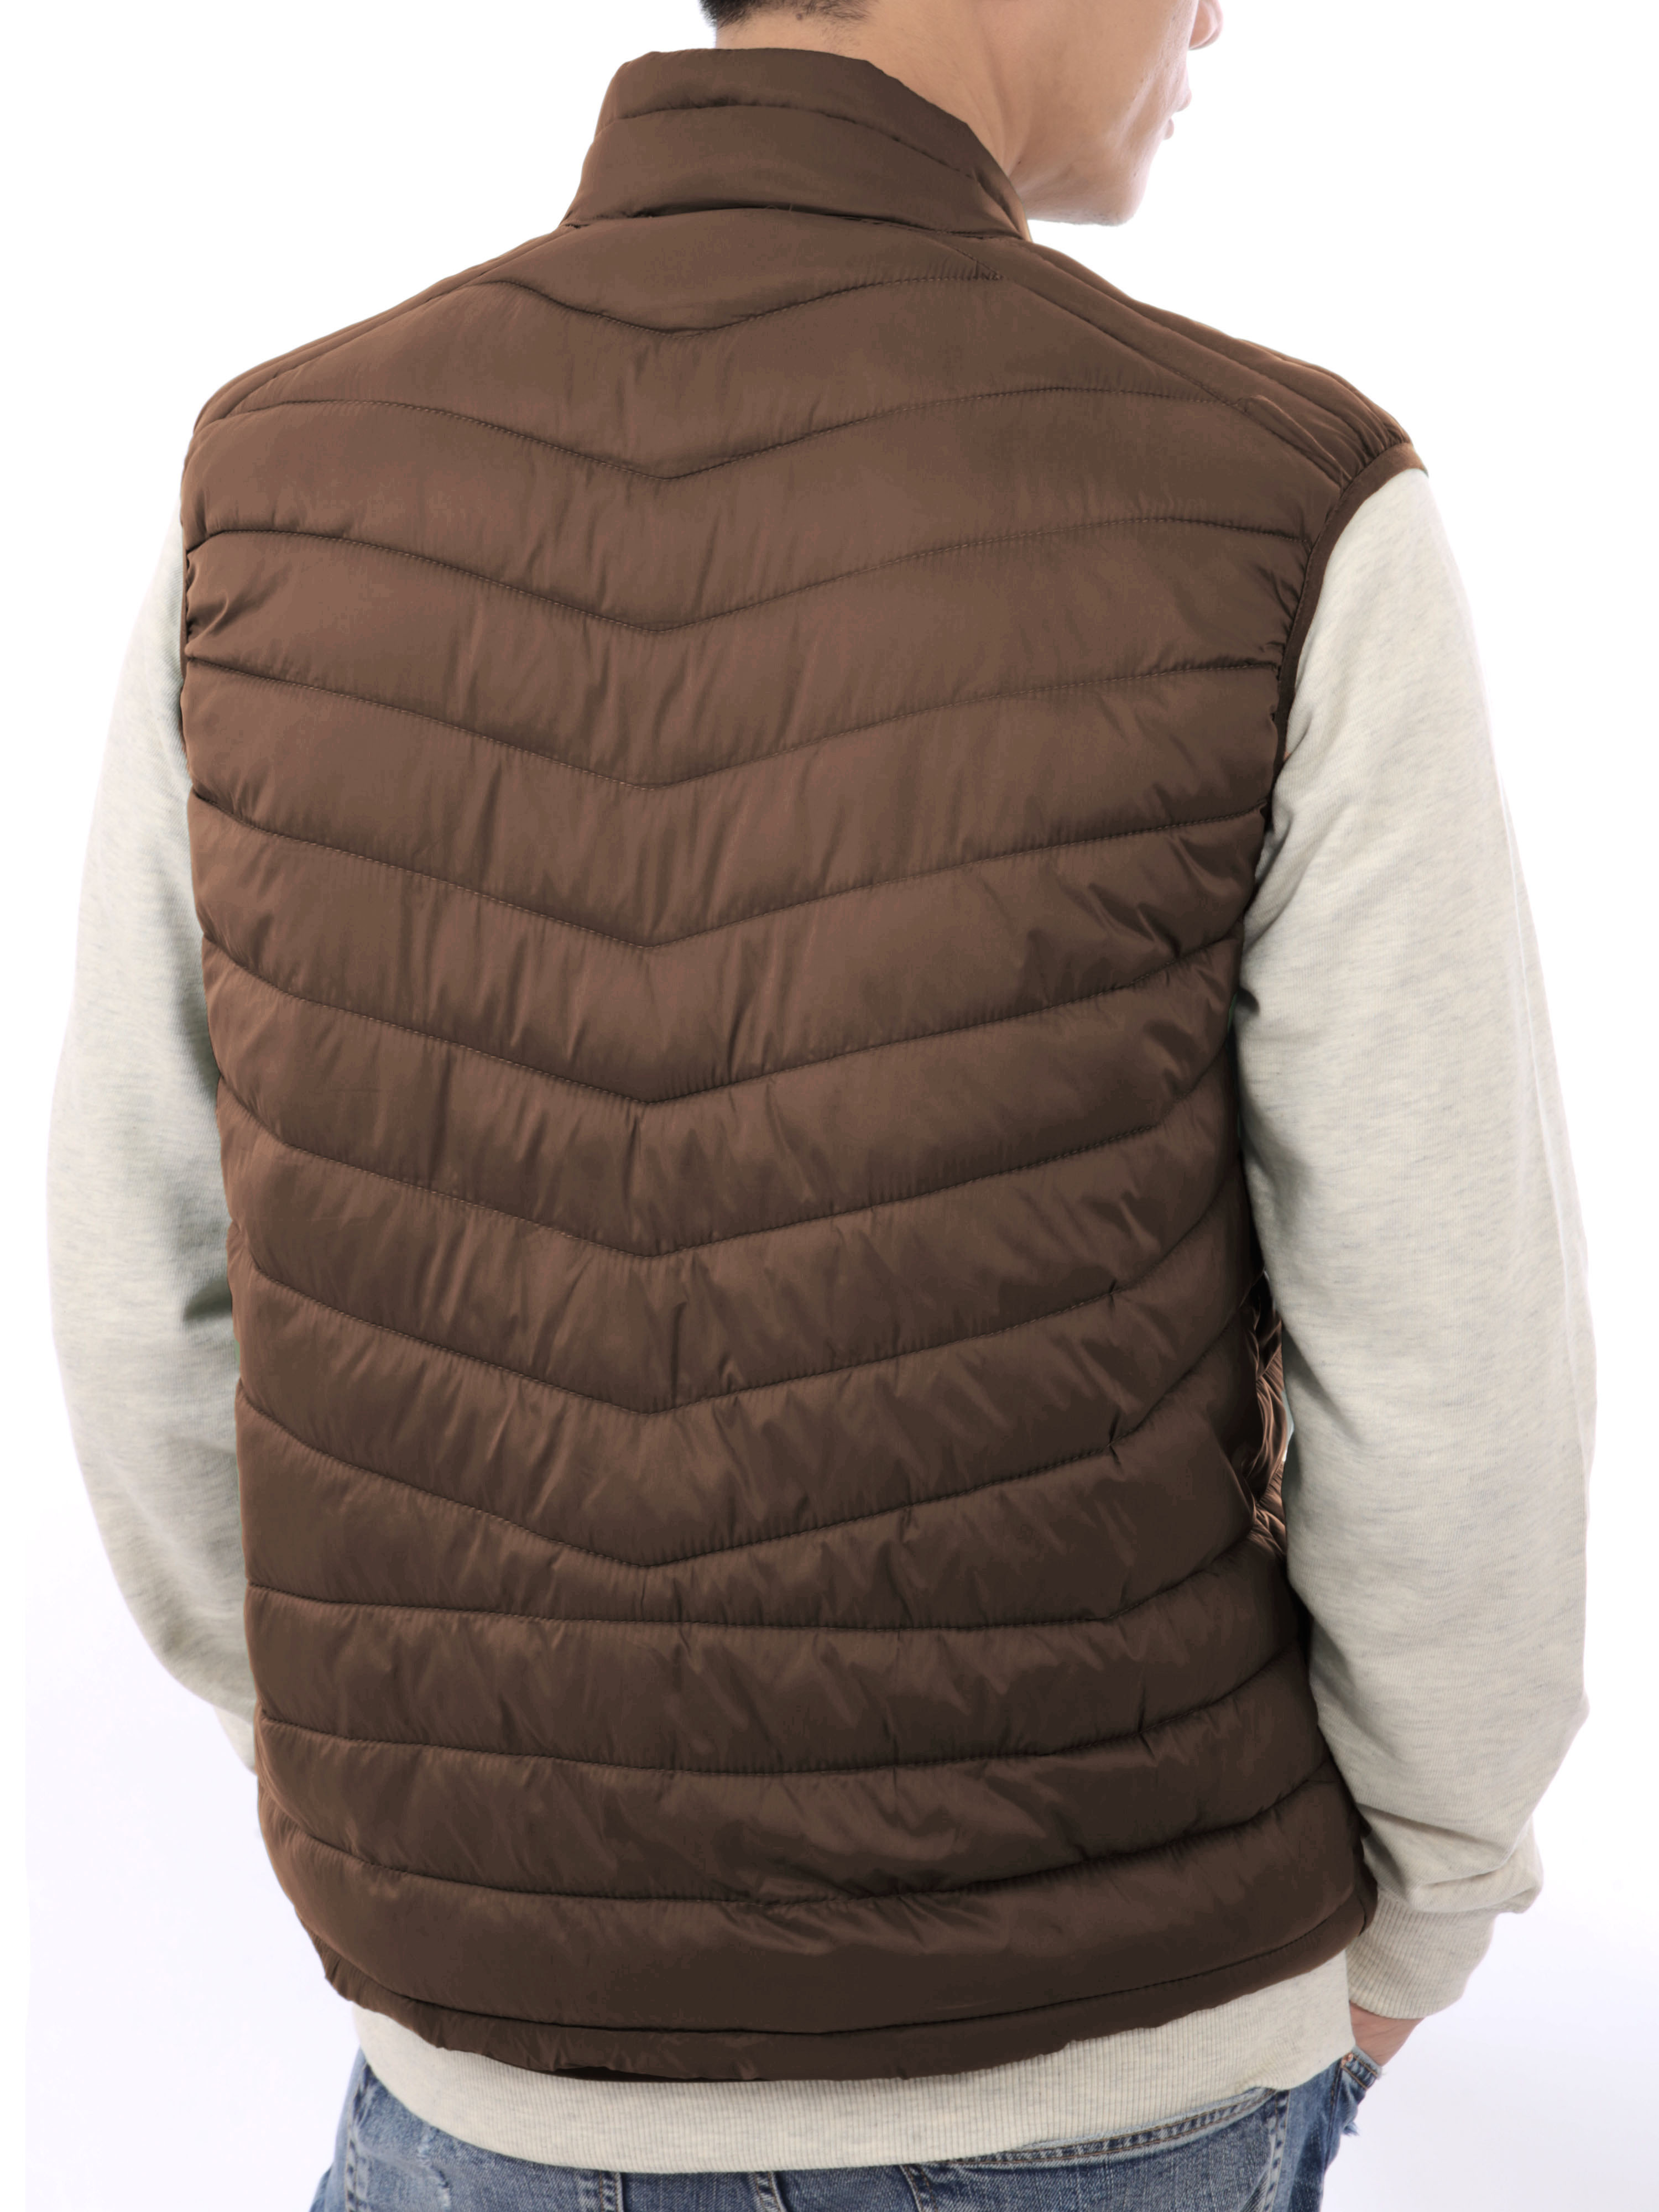 Ma Croix Mens Ultra Light Puffer Down Vest Polyester Padded Packable All Season Vest - image 2 of 8